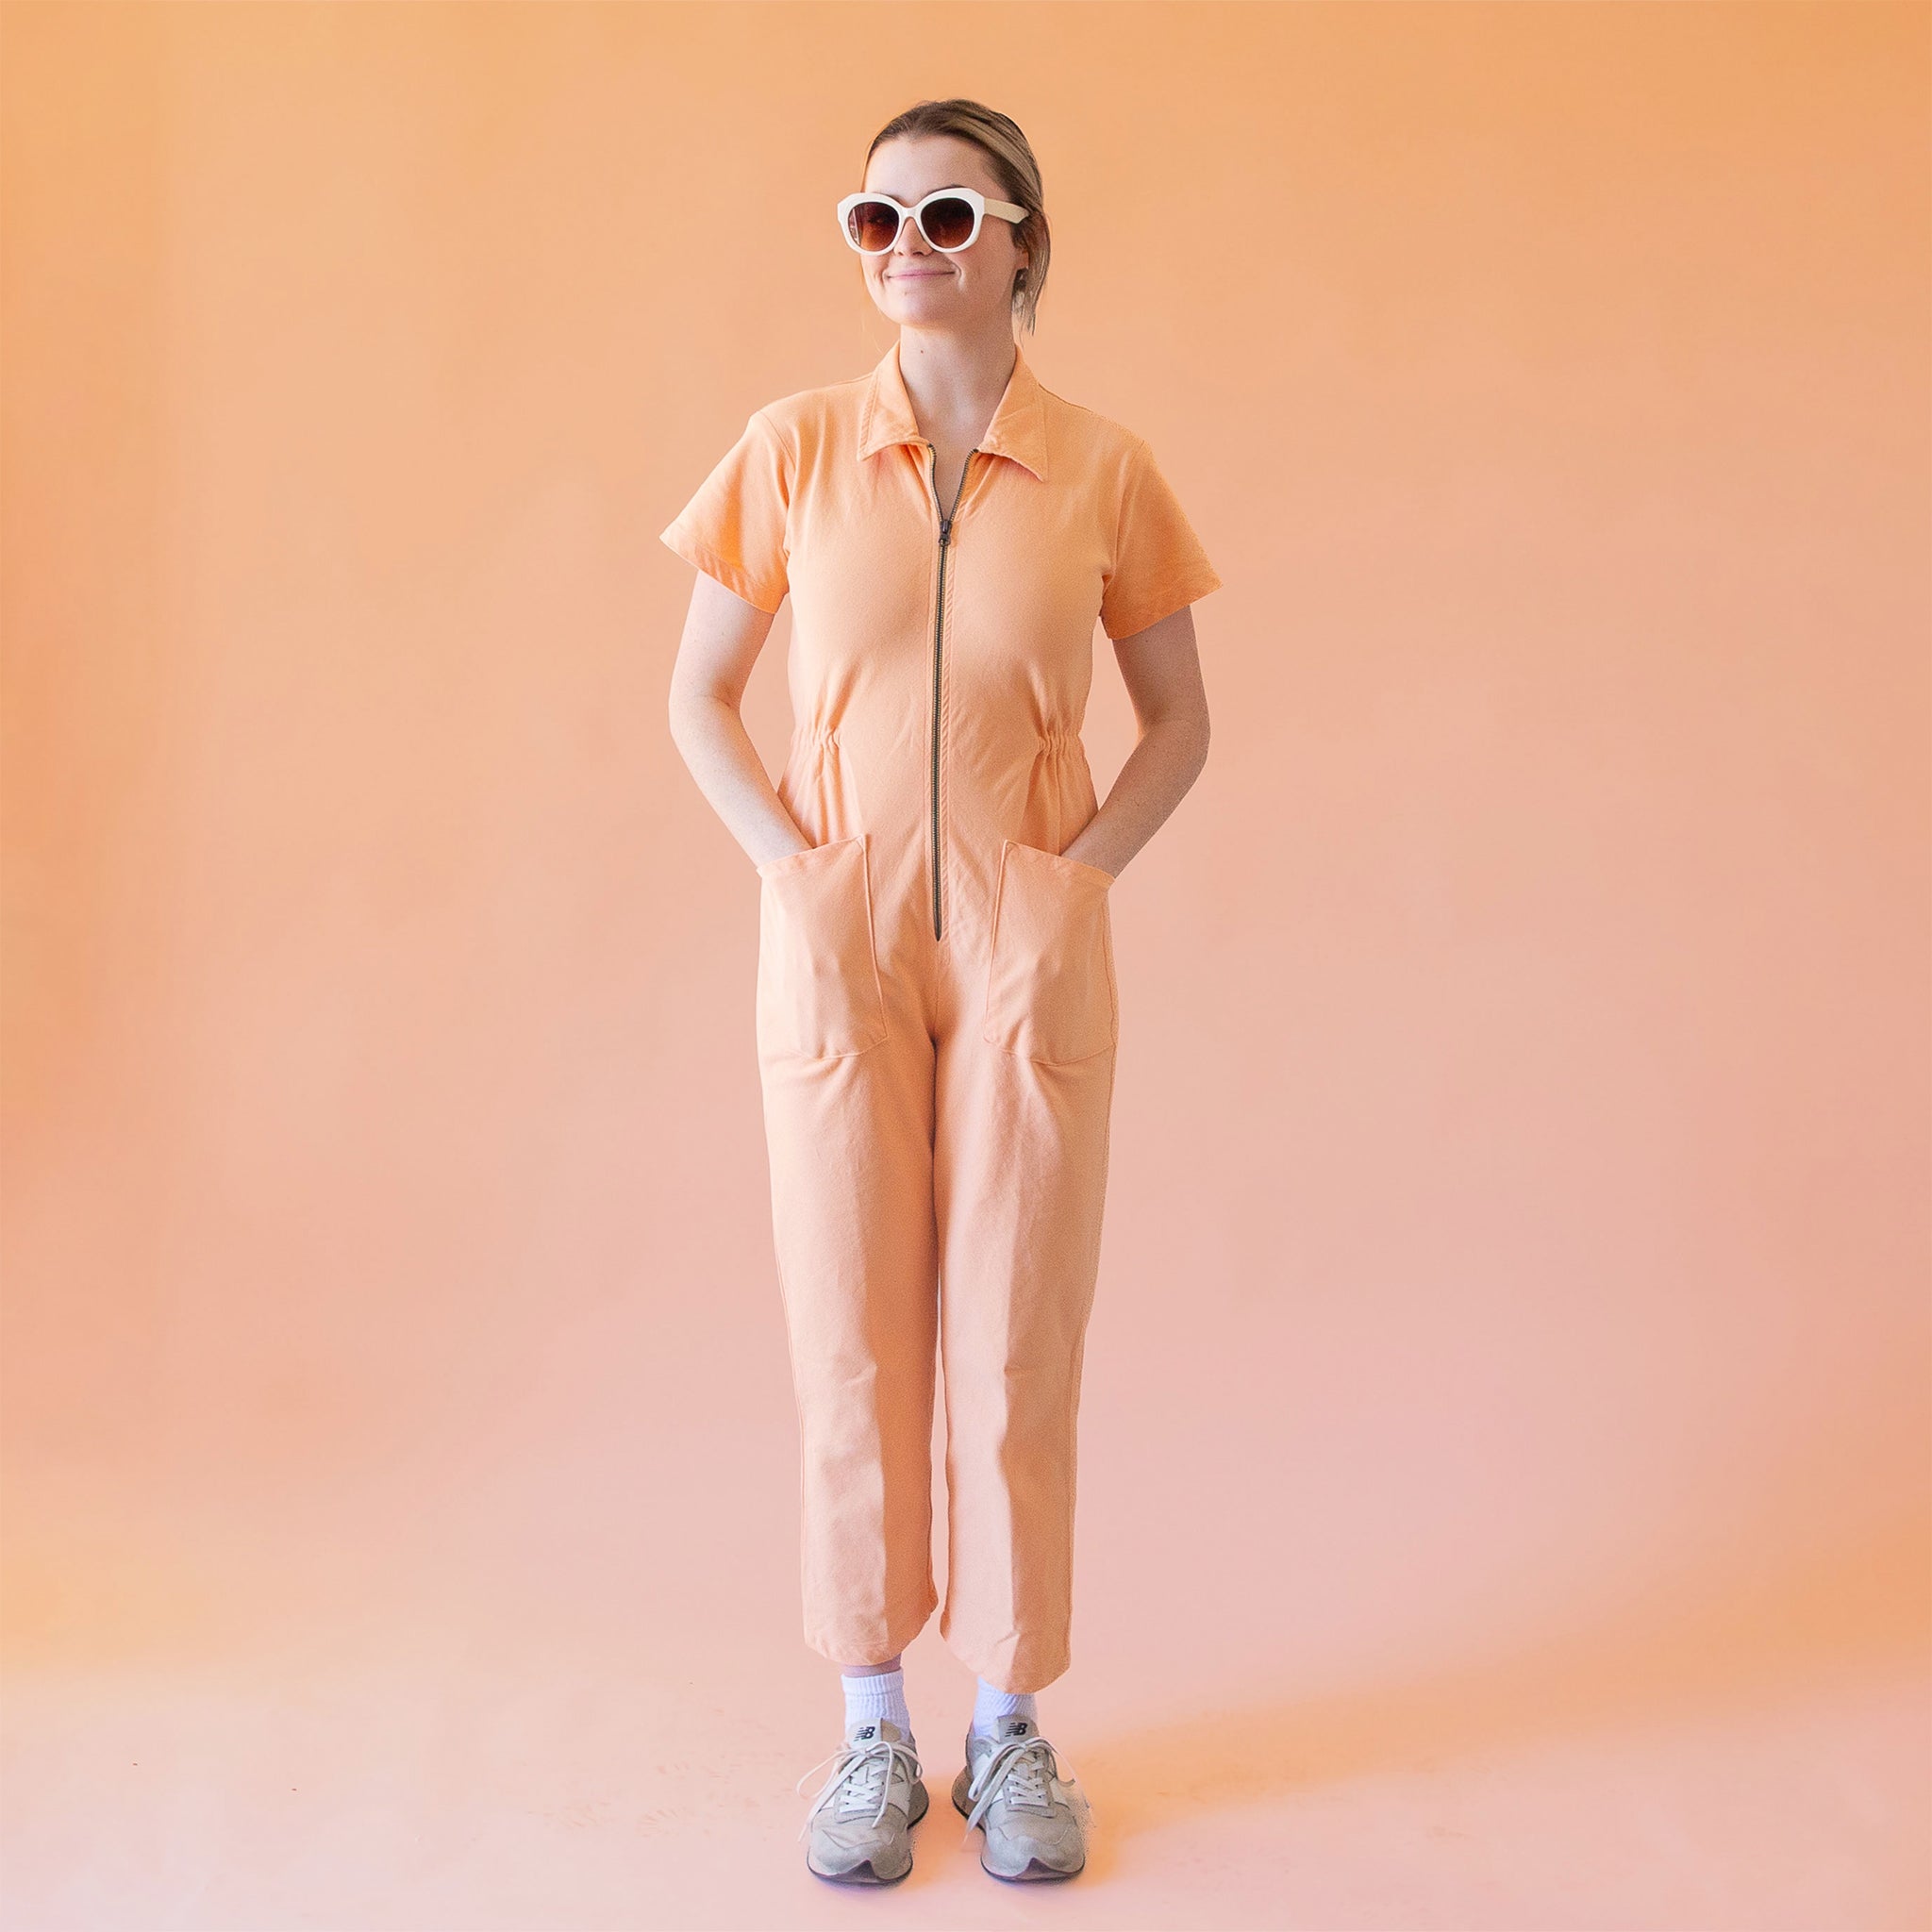 A model wearing a light peach colored short sleeve jumpsuit with a zipper up the front and a collar.